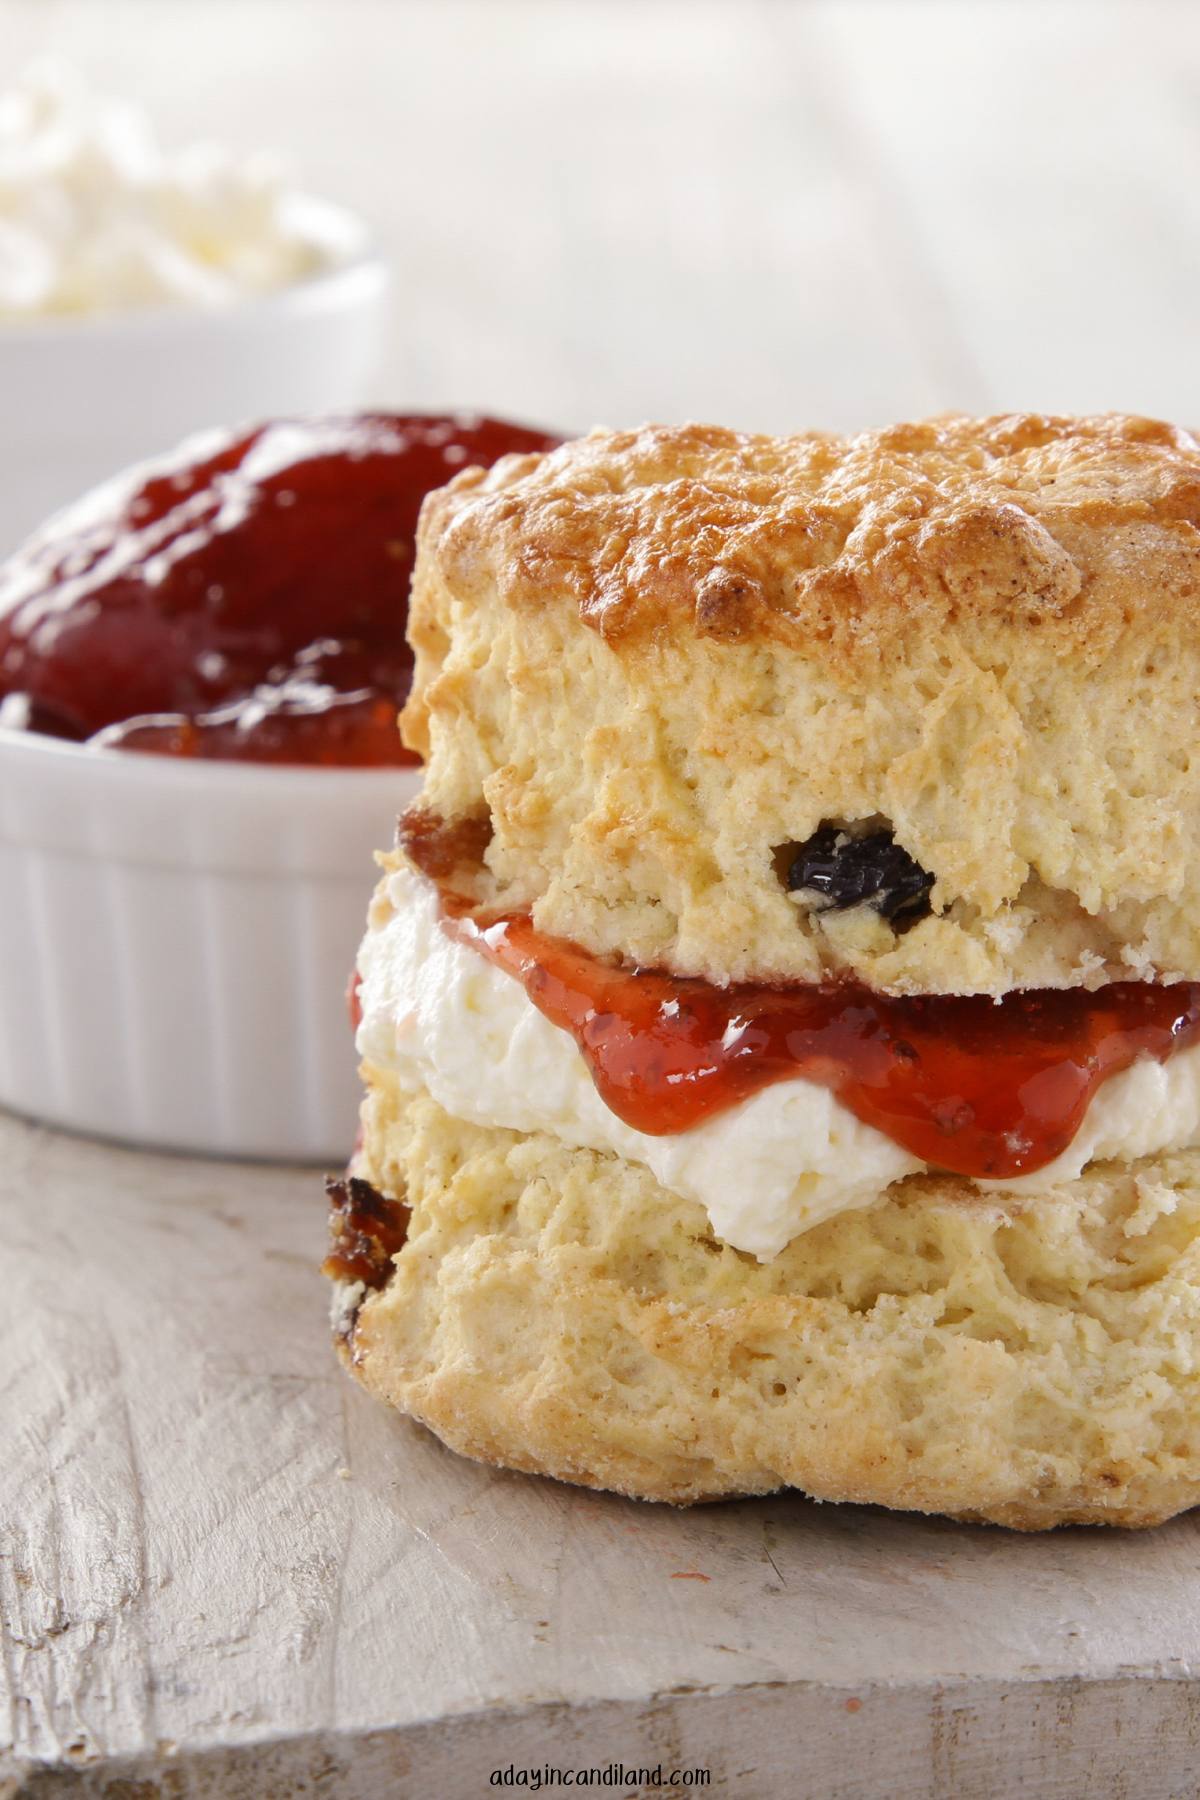 Plate with scone and jam. 